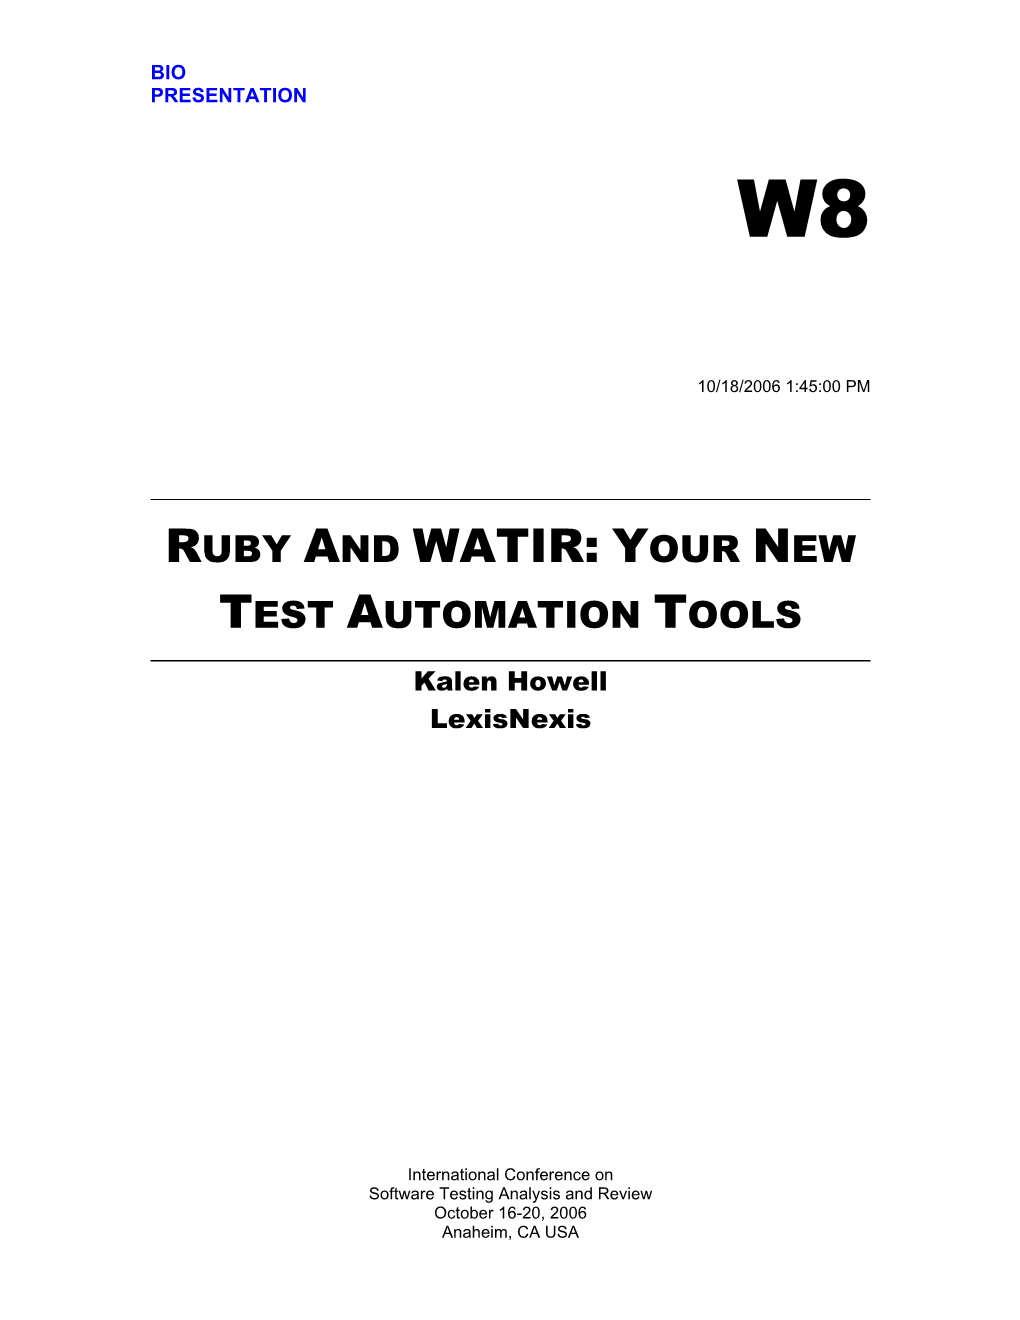 Ruby and Watir: Your New Test Automation Tools